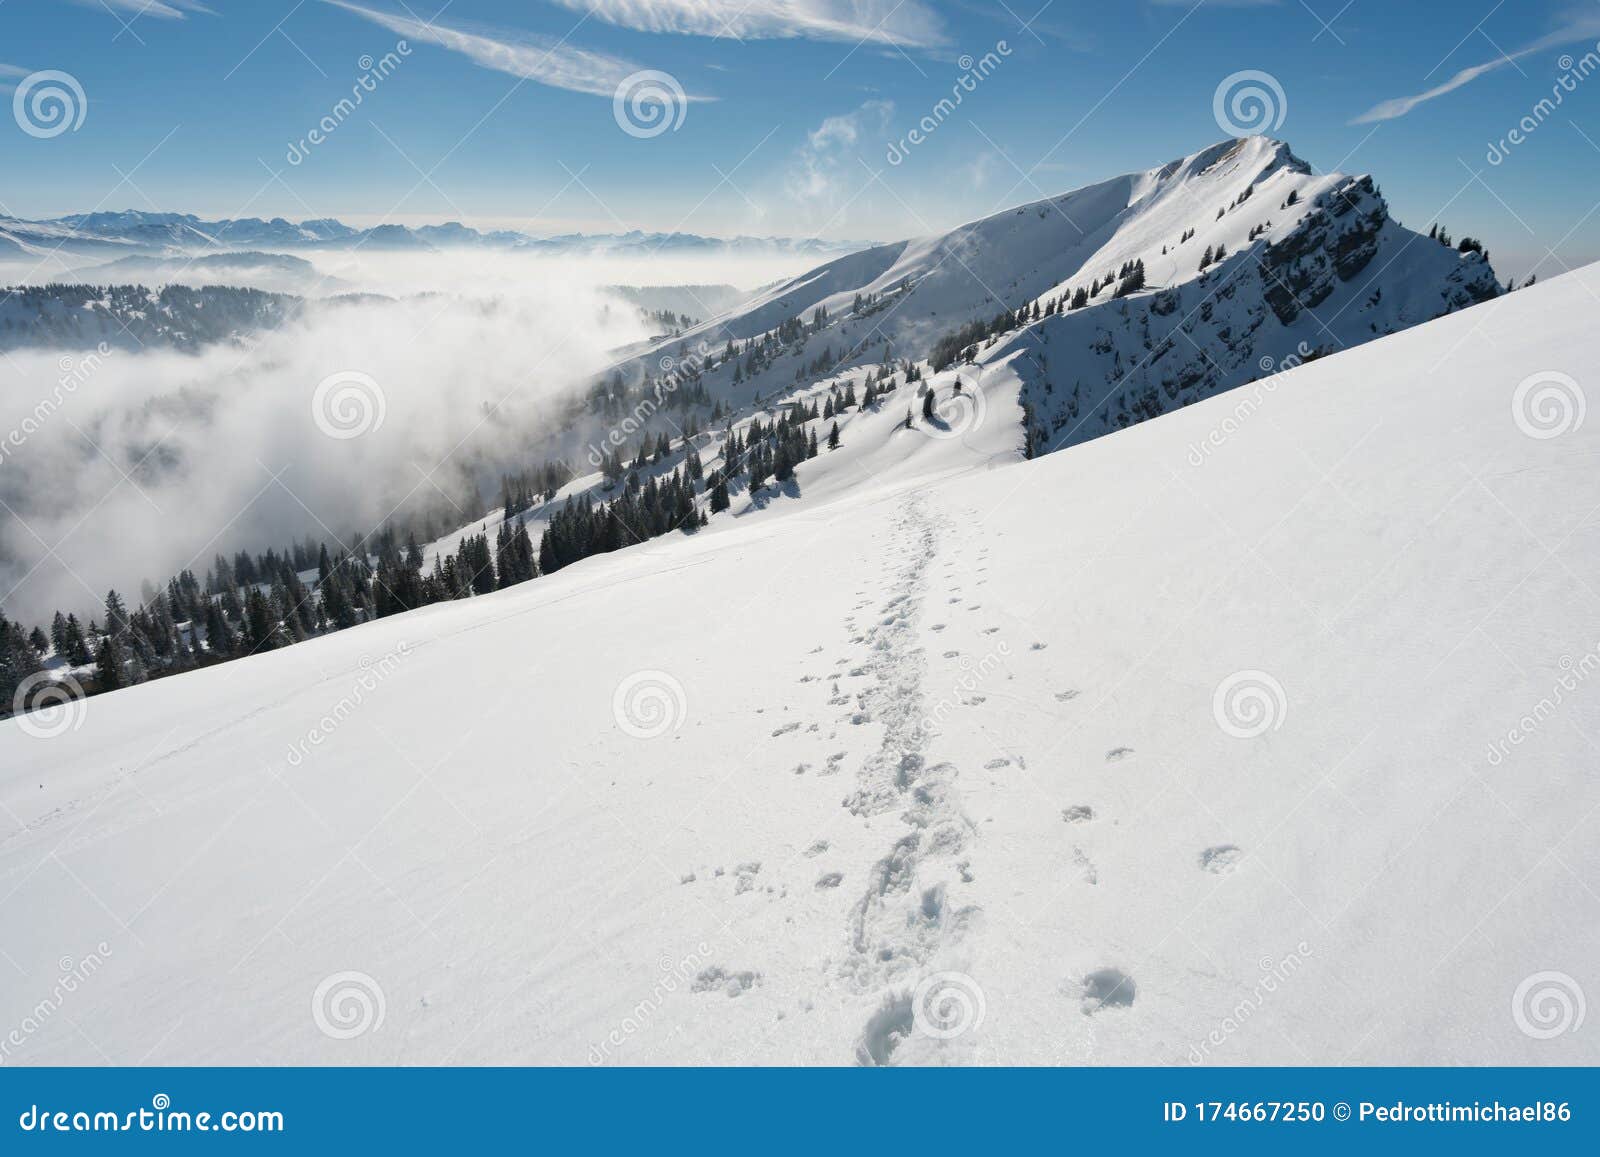 snowshoe tour on the hochgrat in the allgau